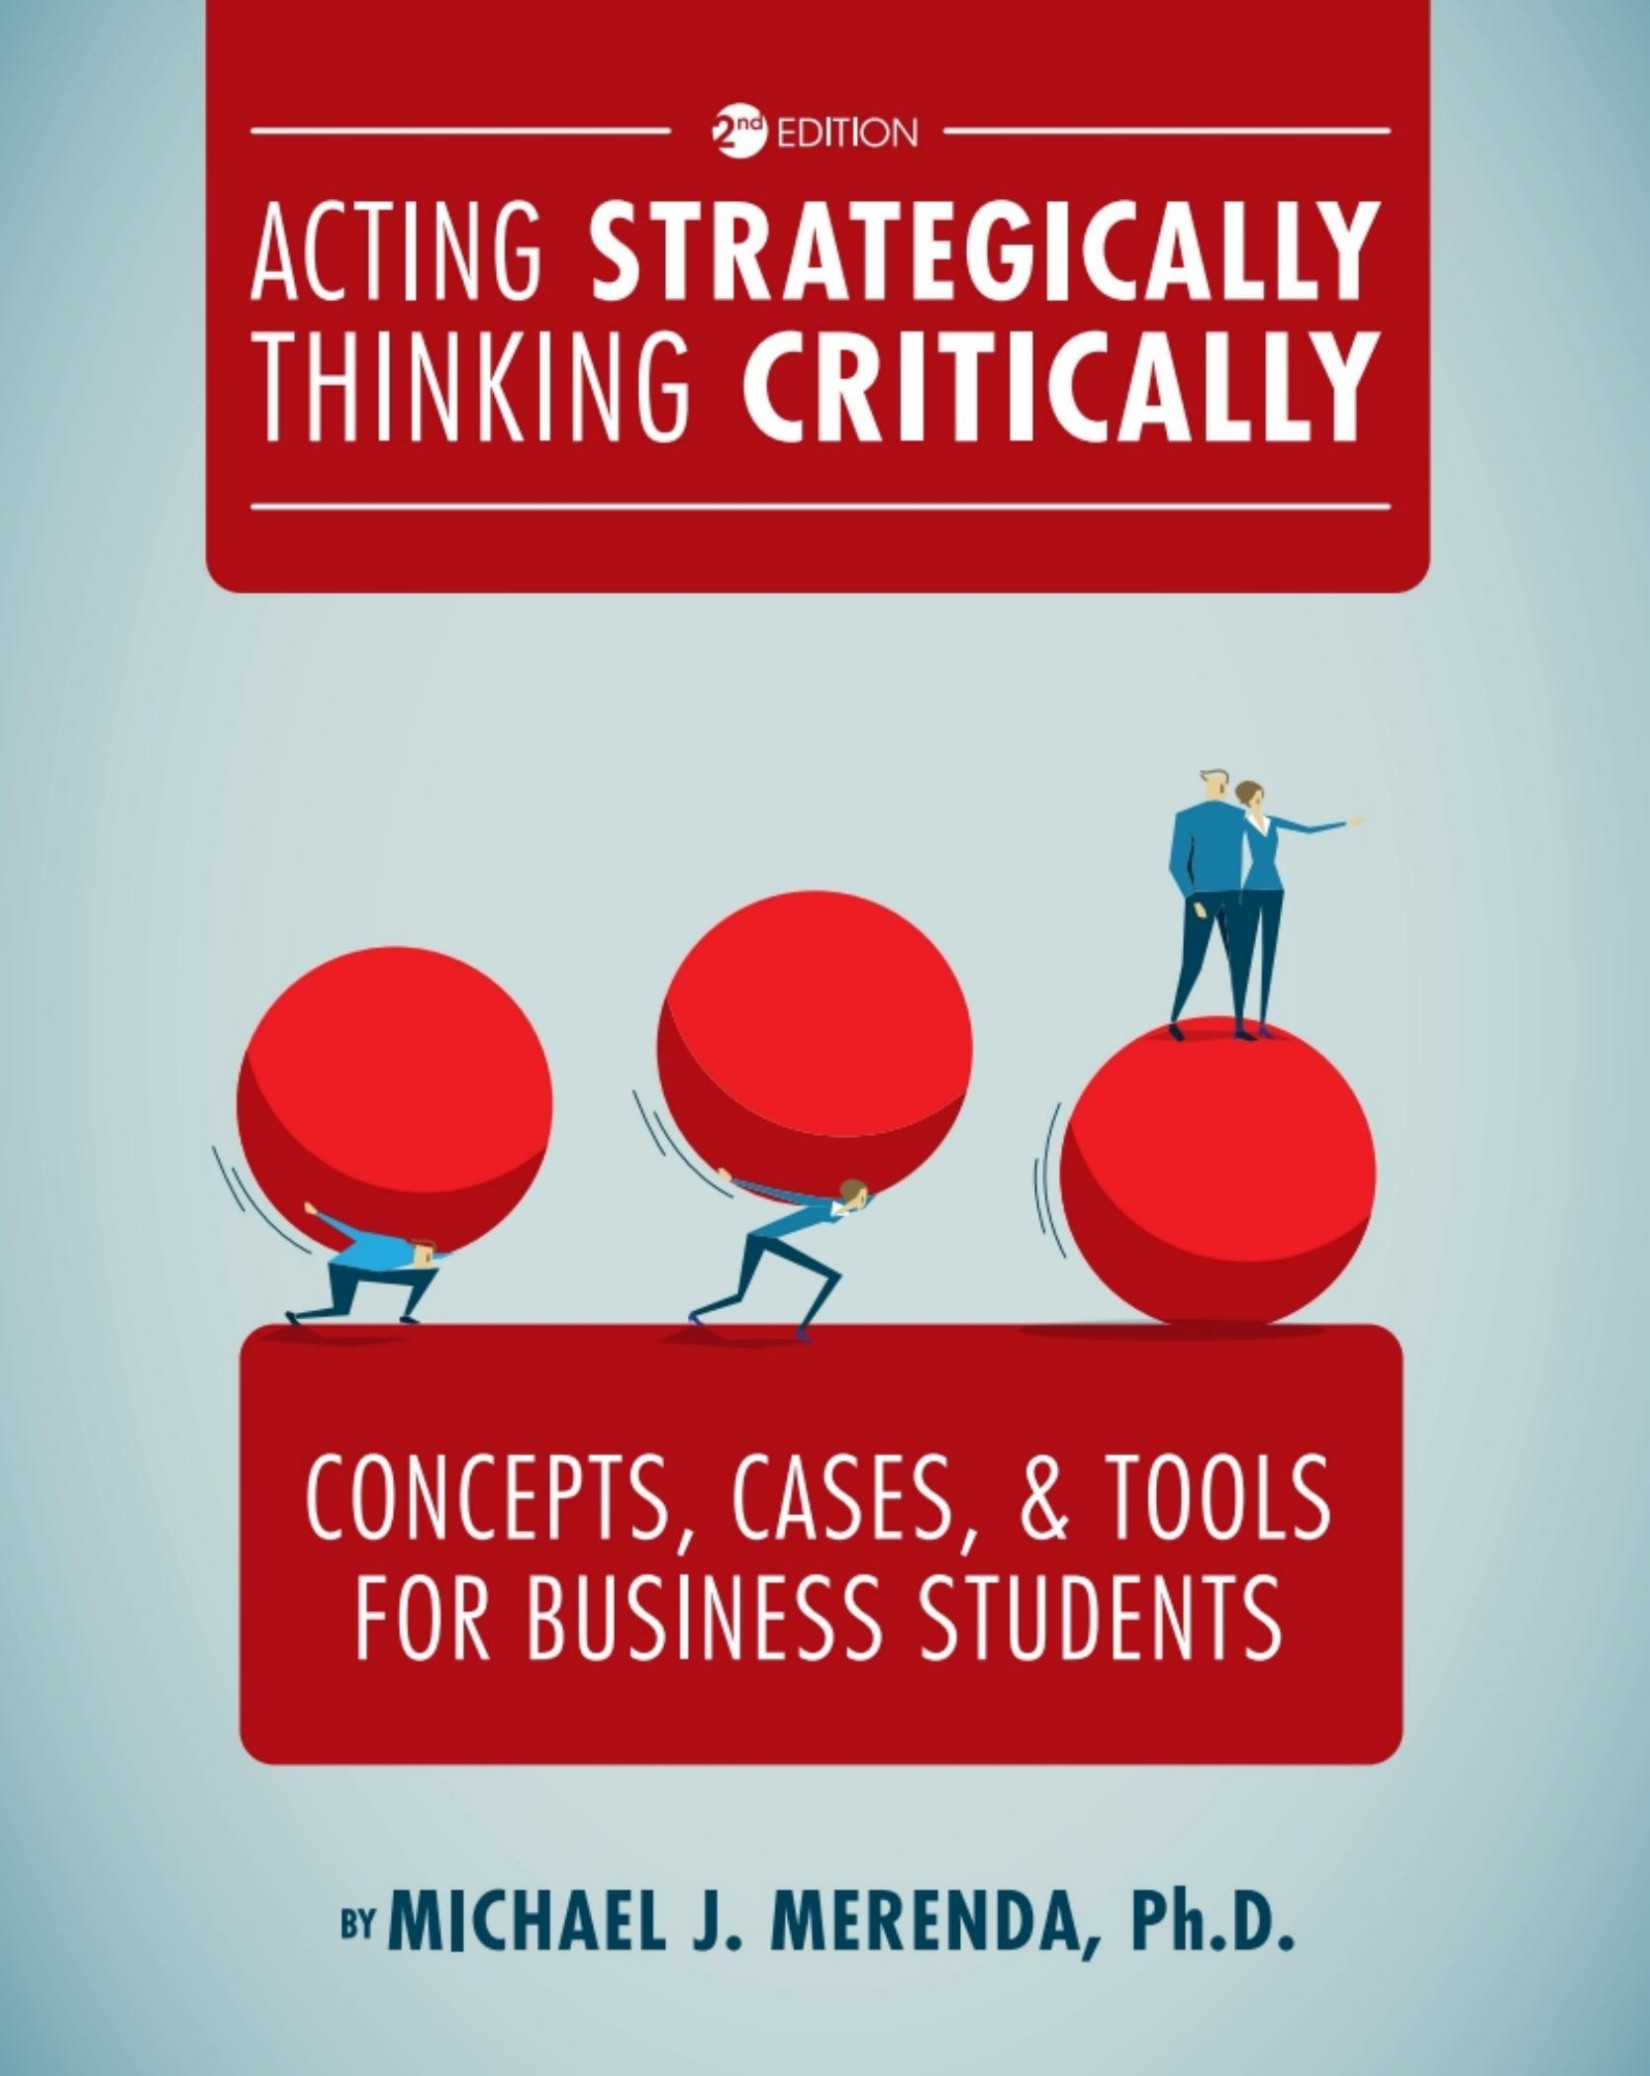 Acting Strategically Thinking Critically Concepts Cases and Tools for Business Students 2nd 160Yuan  - Wei Zhi.jpg